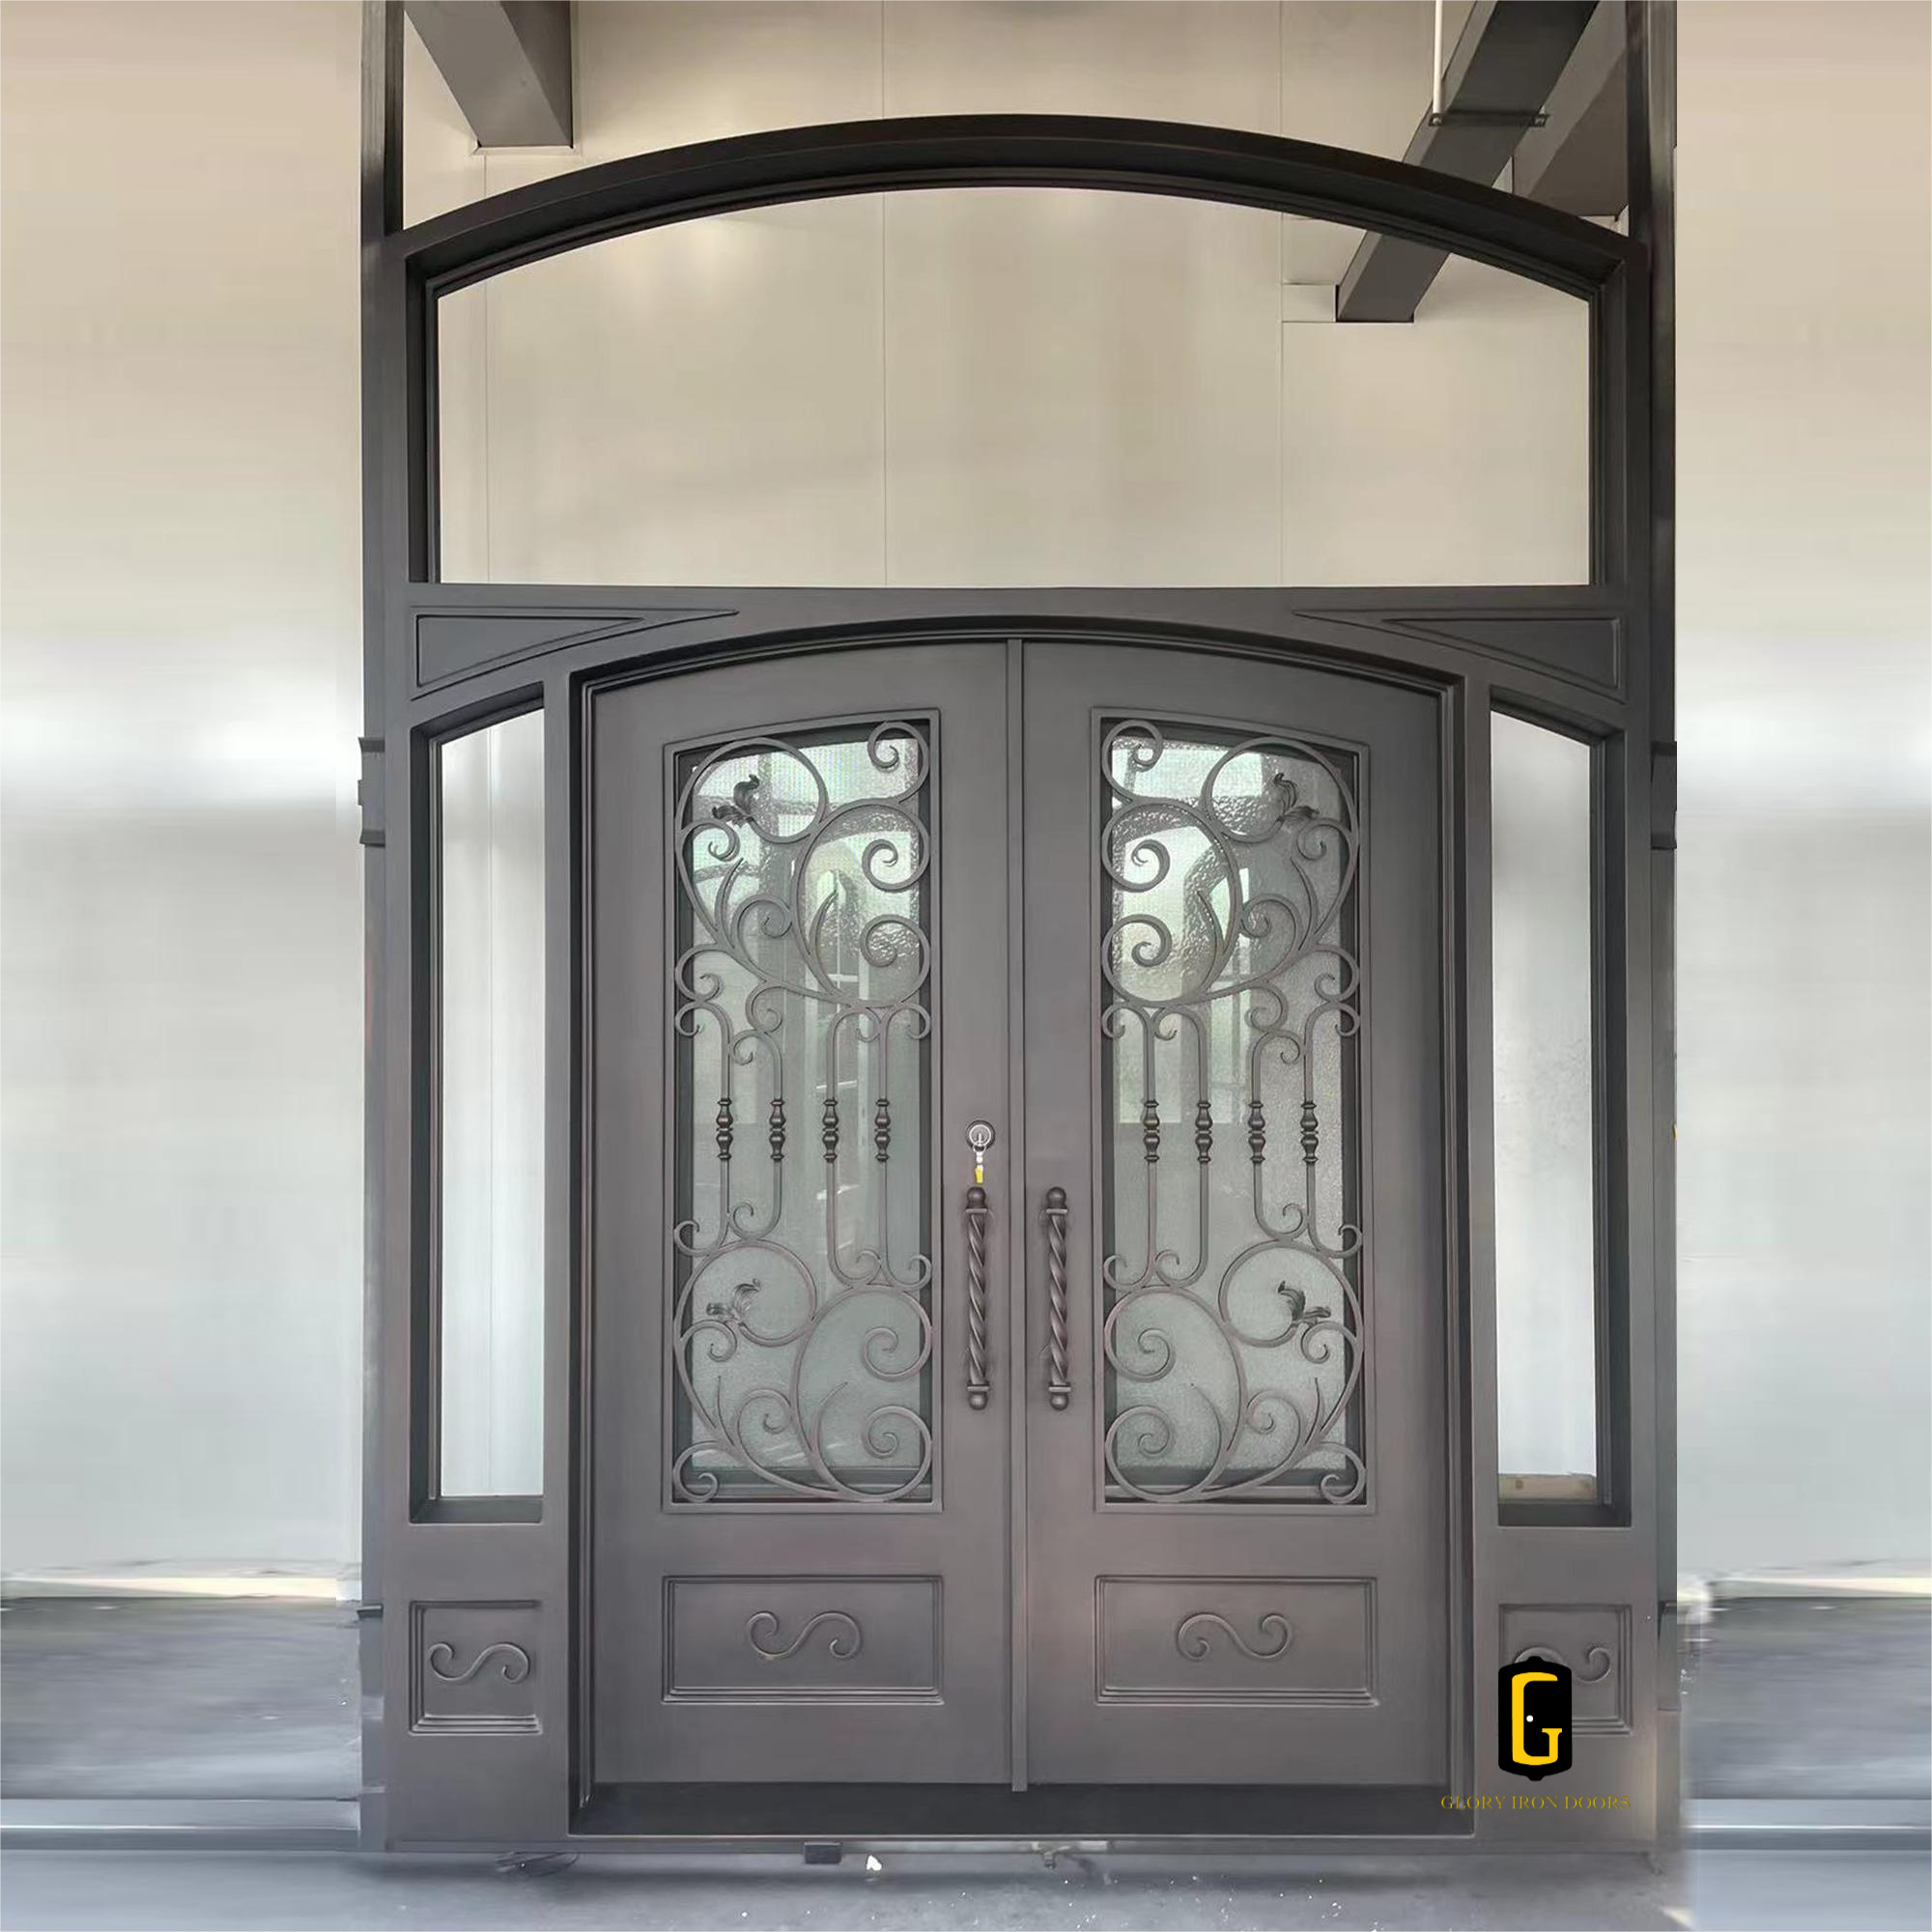 Gloryirondoors large size wrought iron steel front double door with sidelights and transom